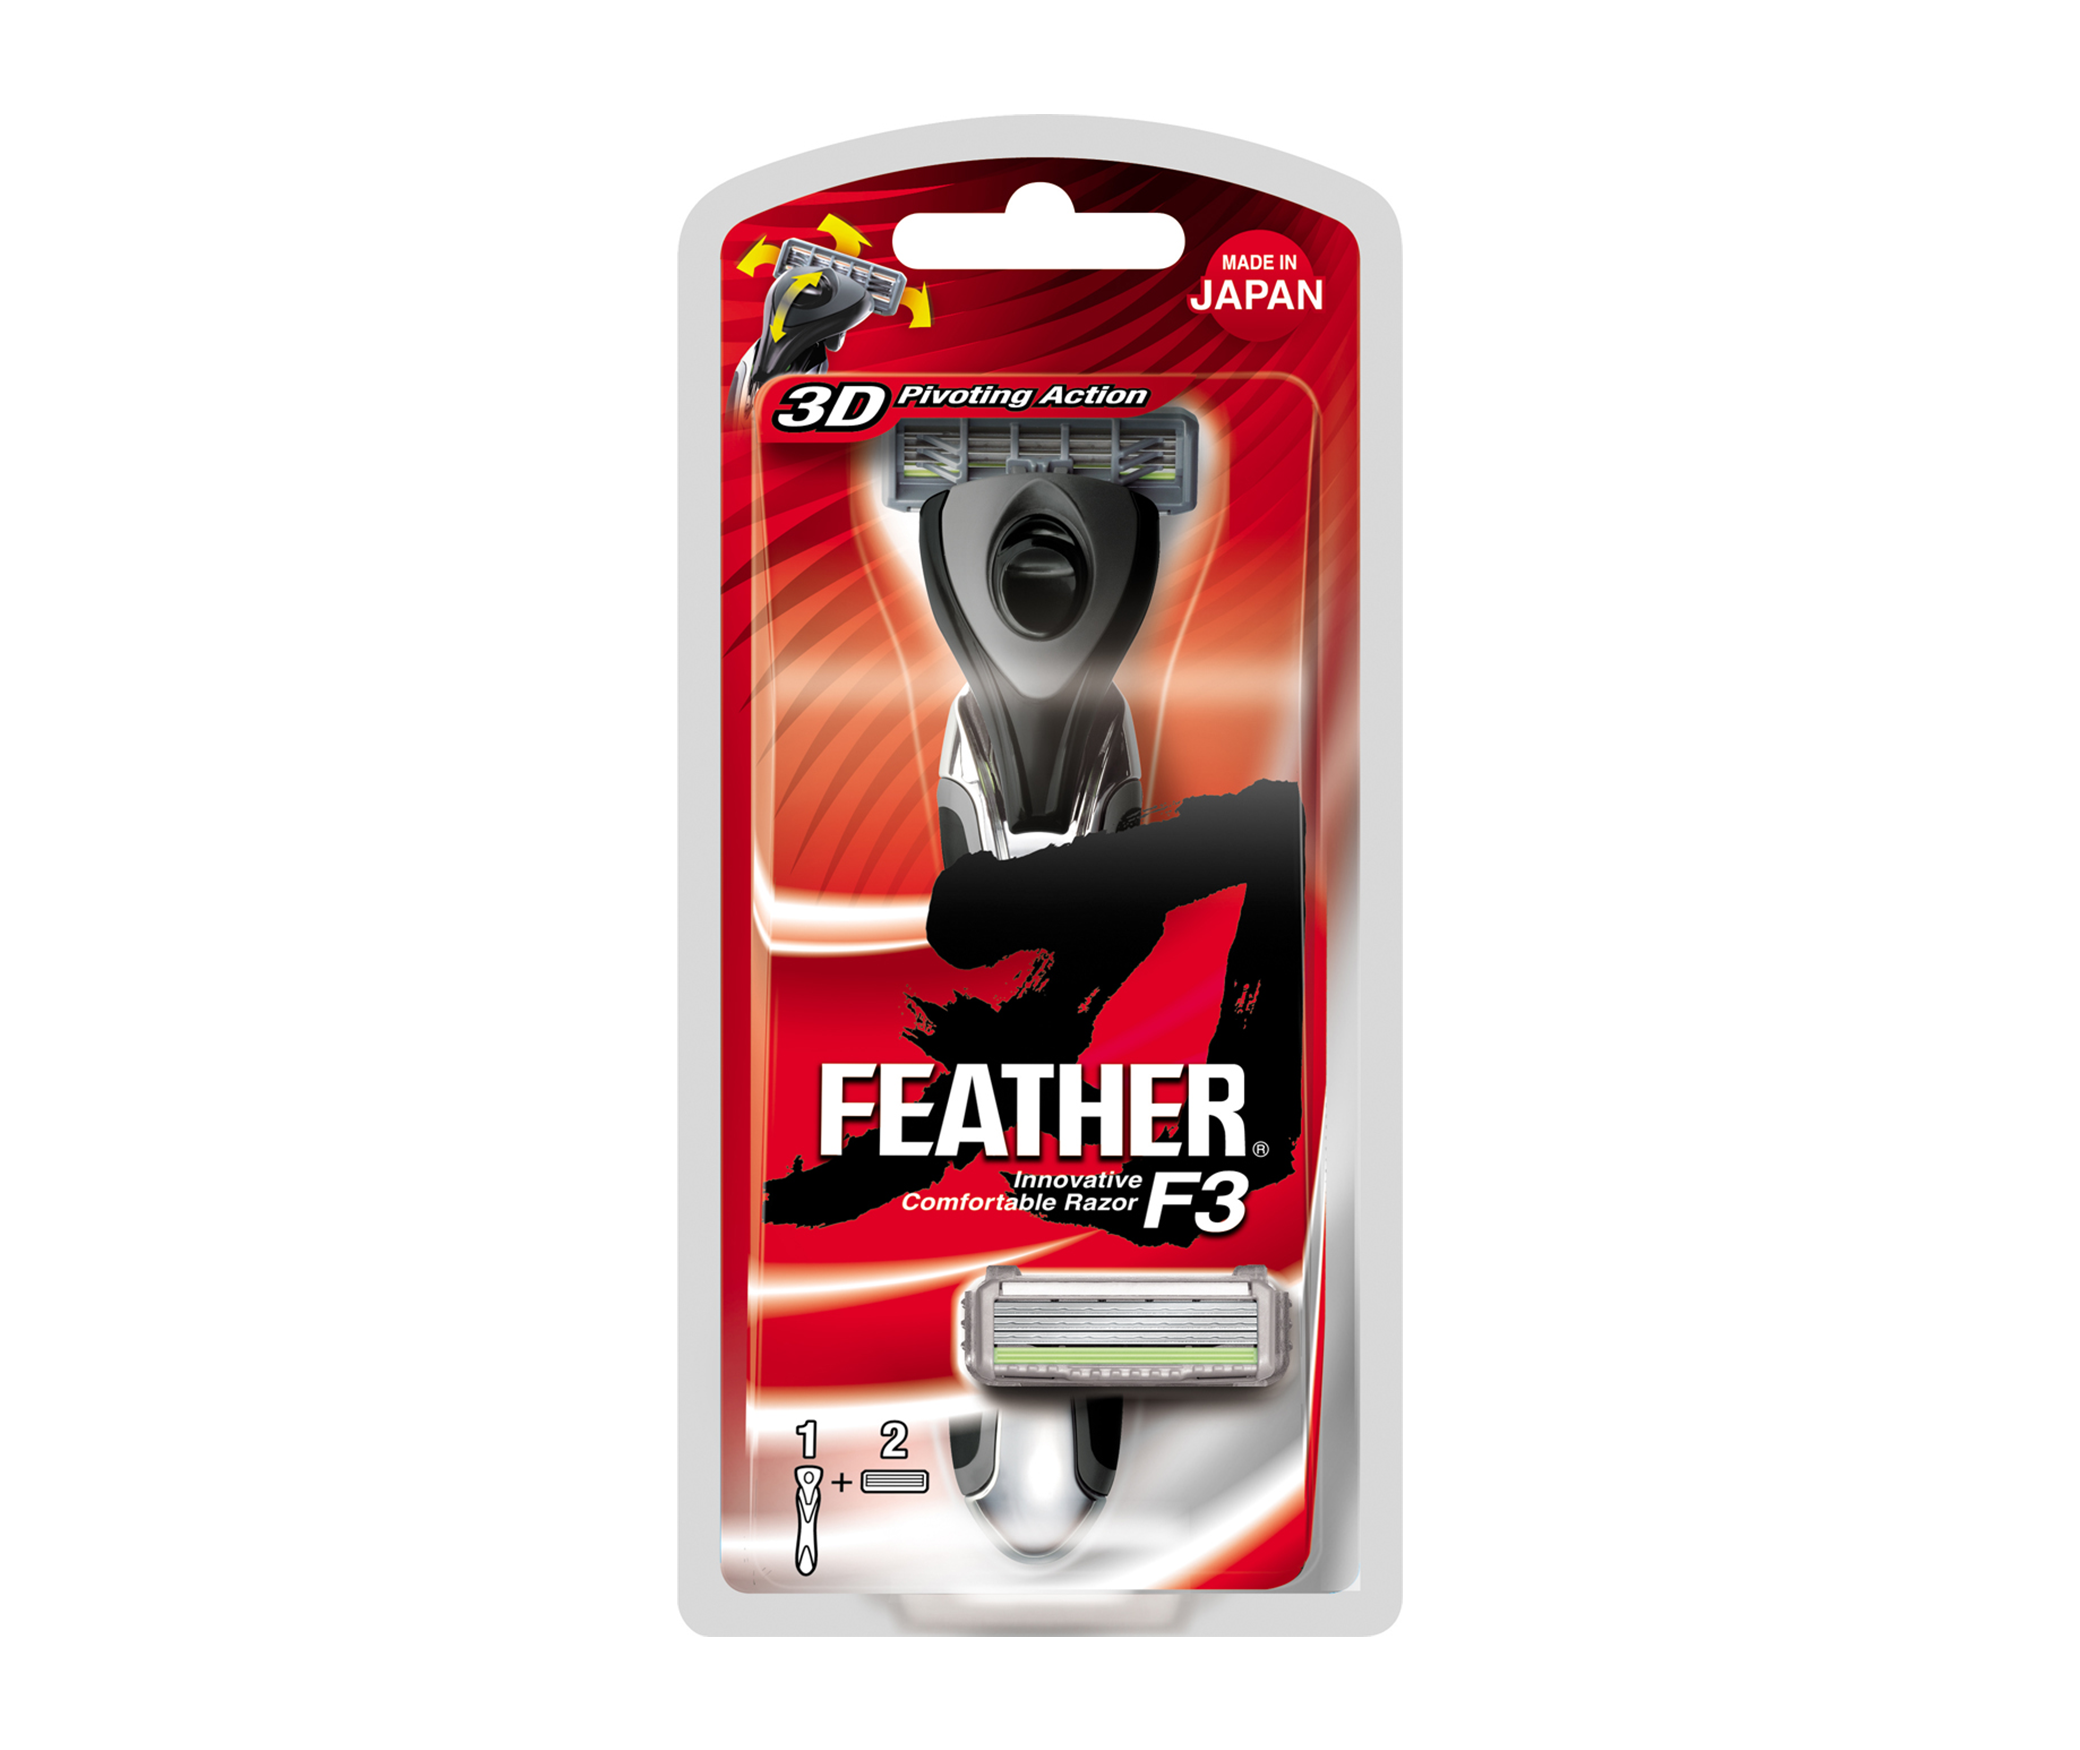 Feather F3 Razor package